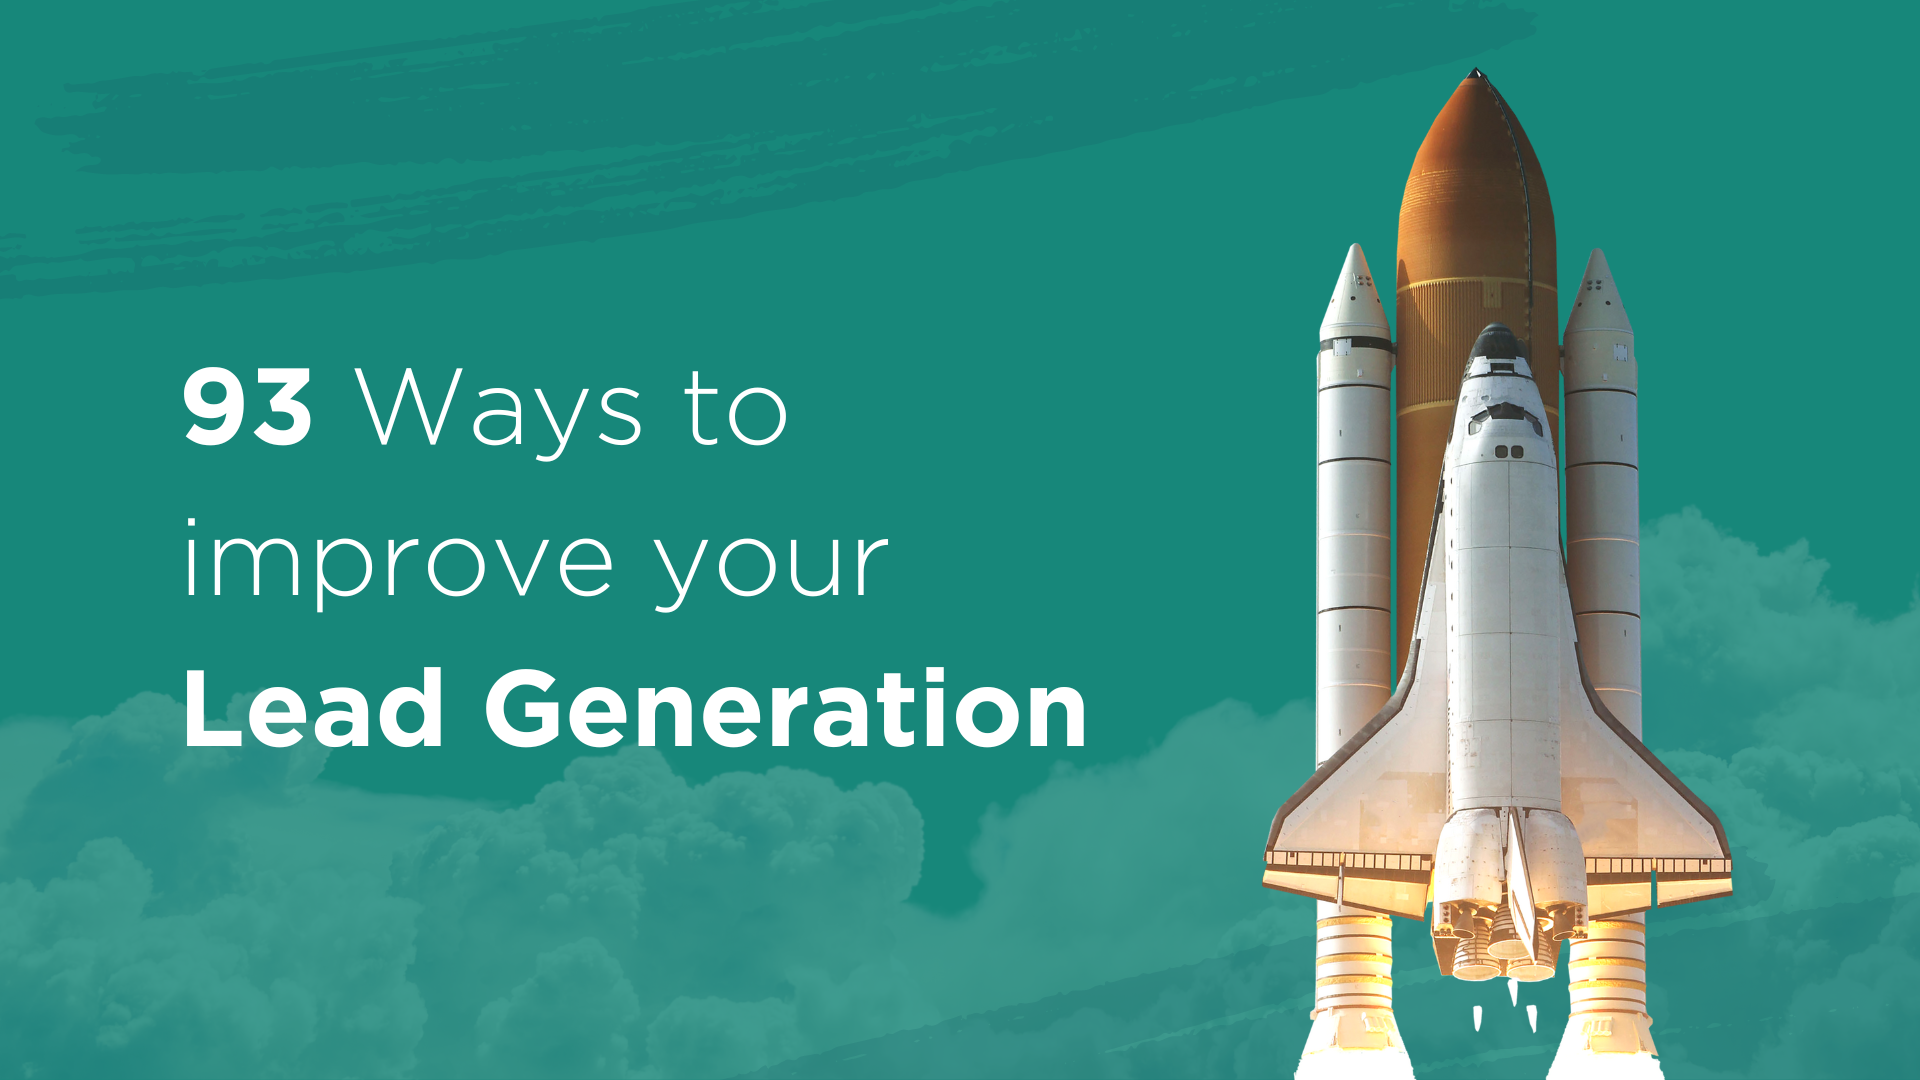 93 Ways to improve your Lead Generation